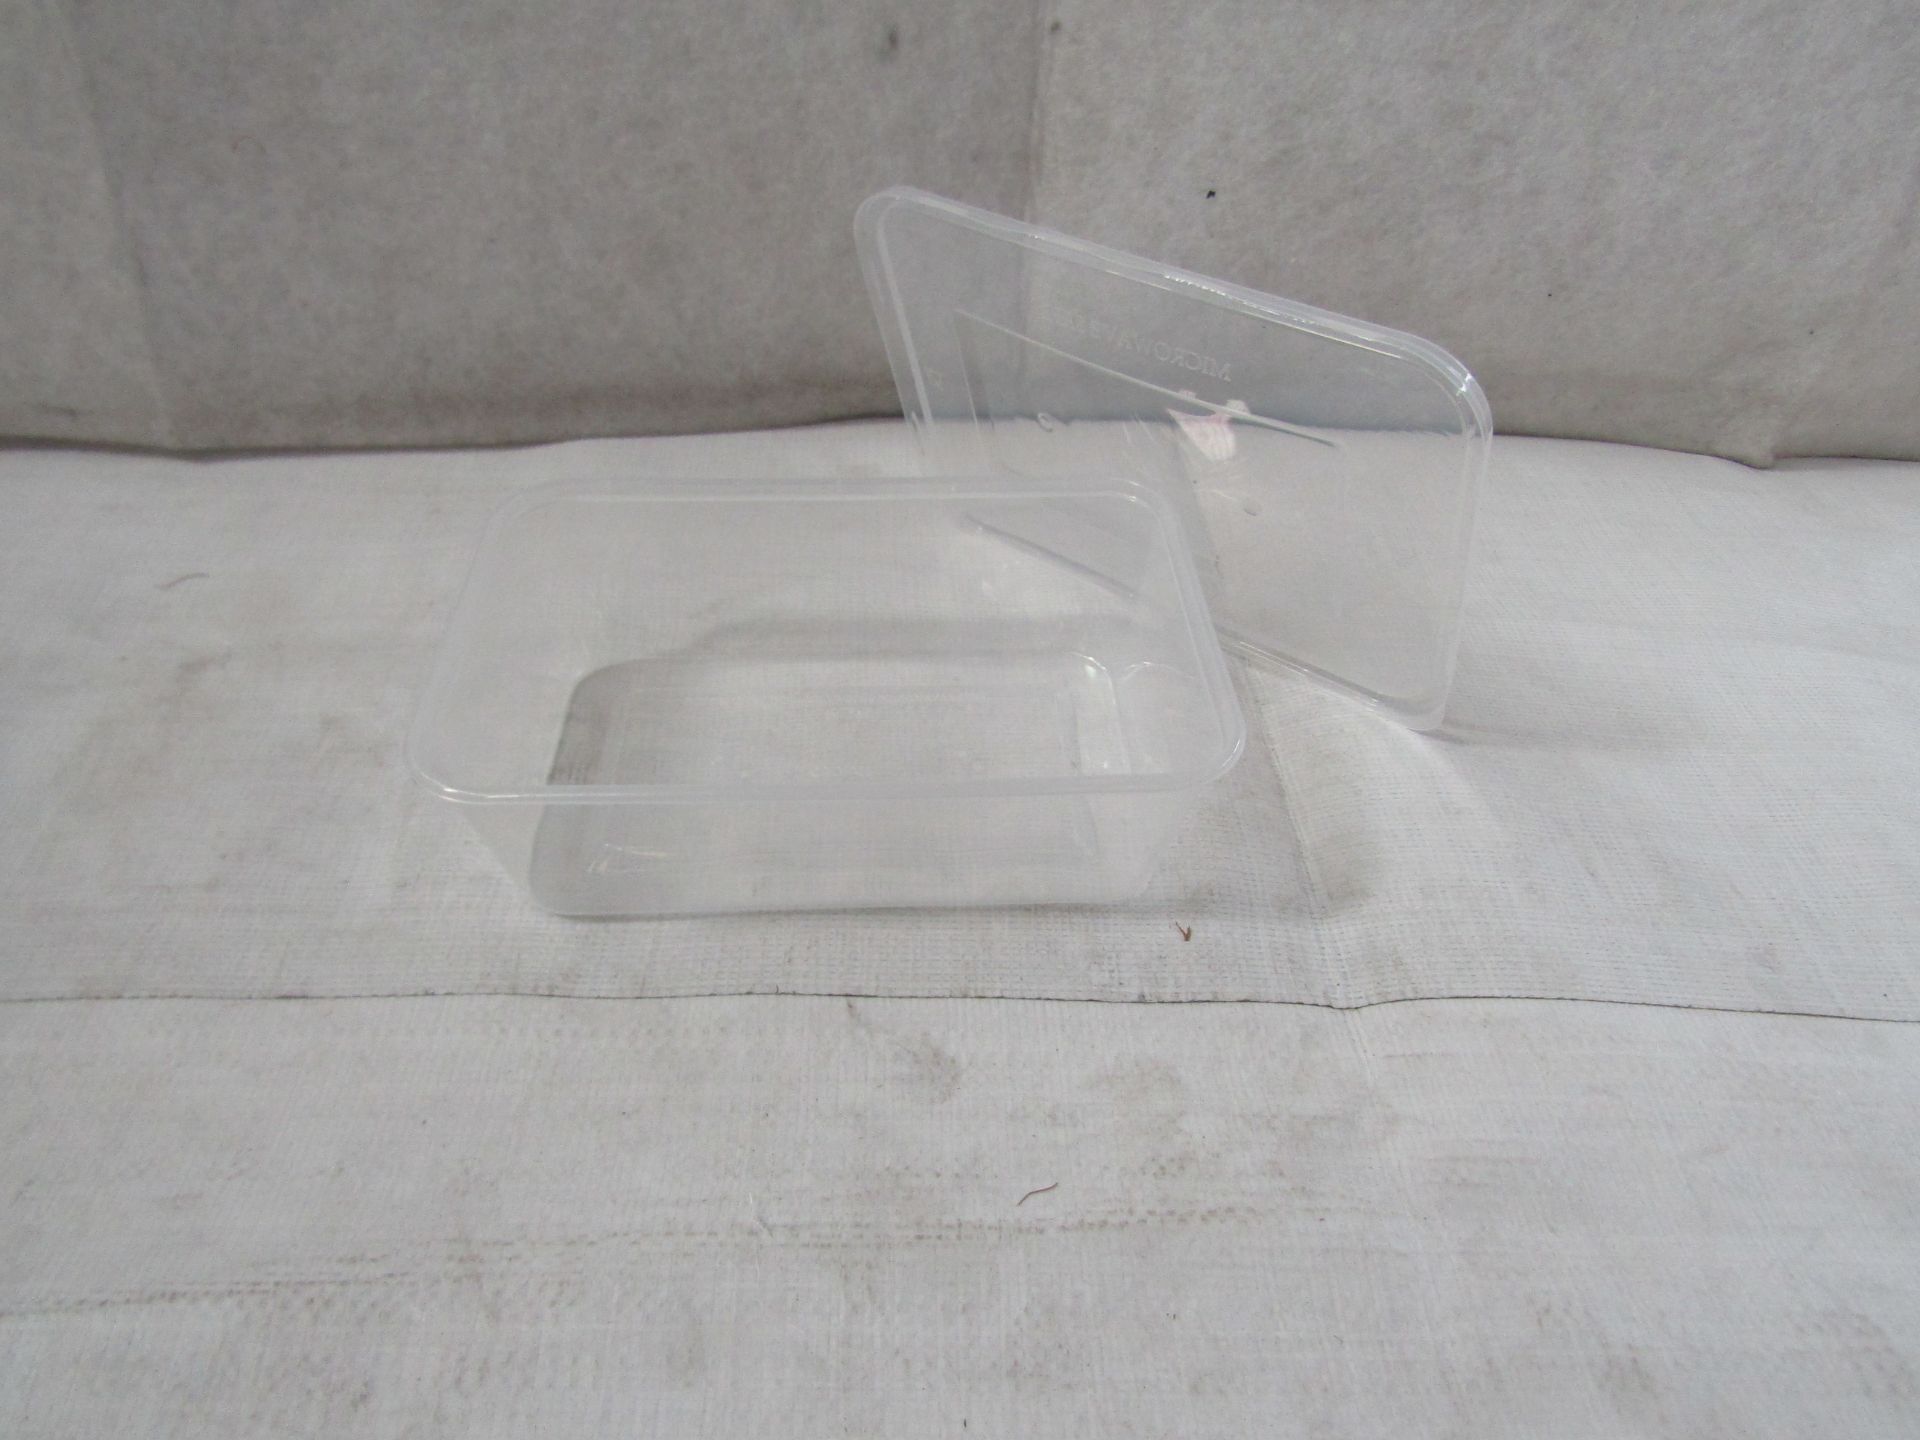 250X Clear Rectangular Microwave Containers - Unused & Boxed.